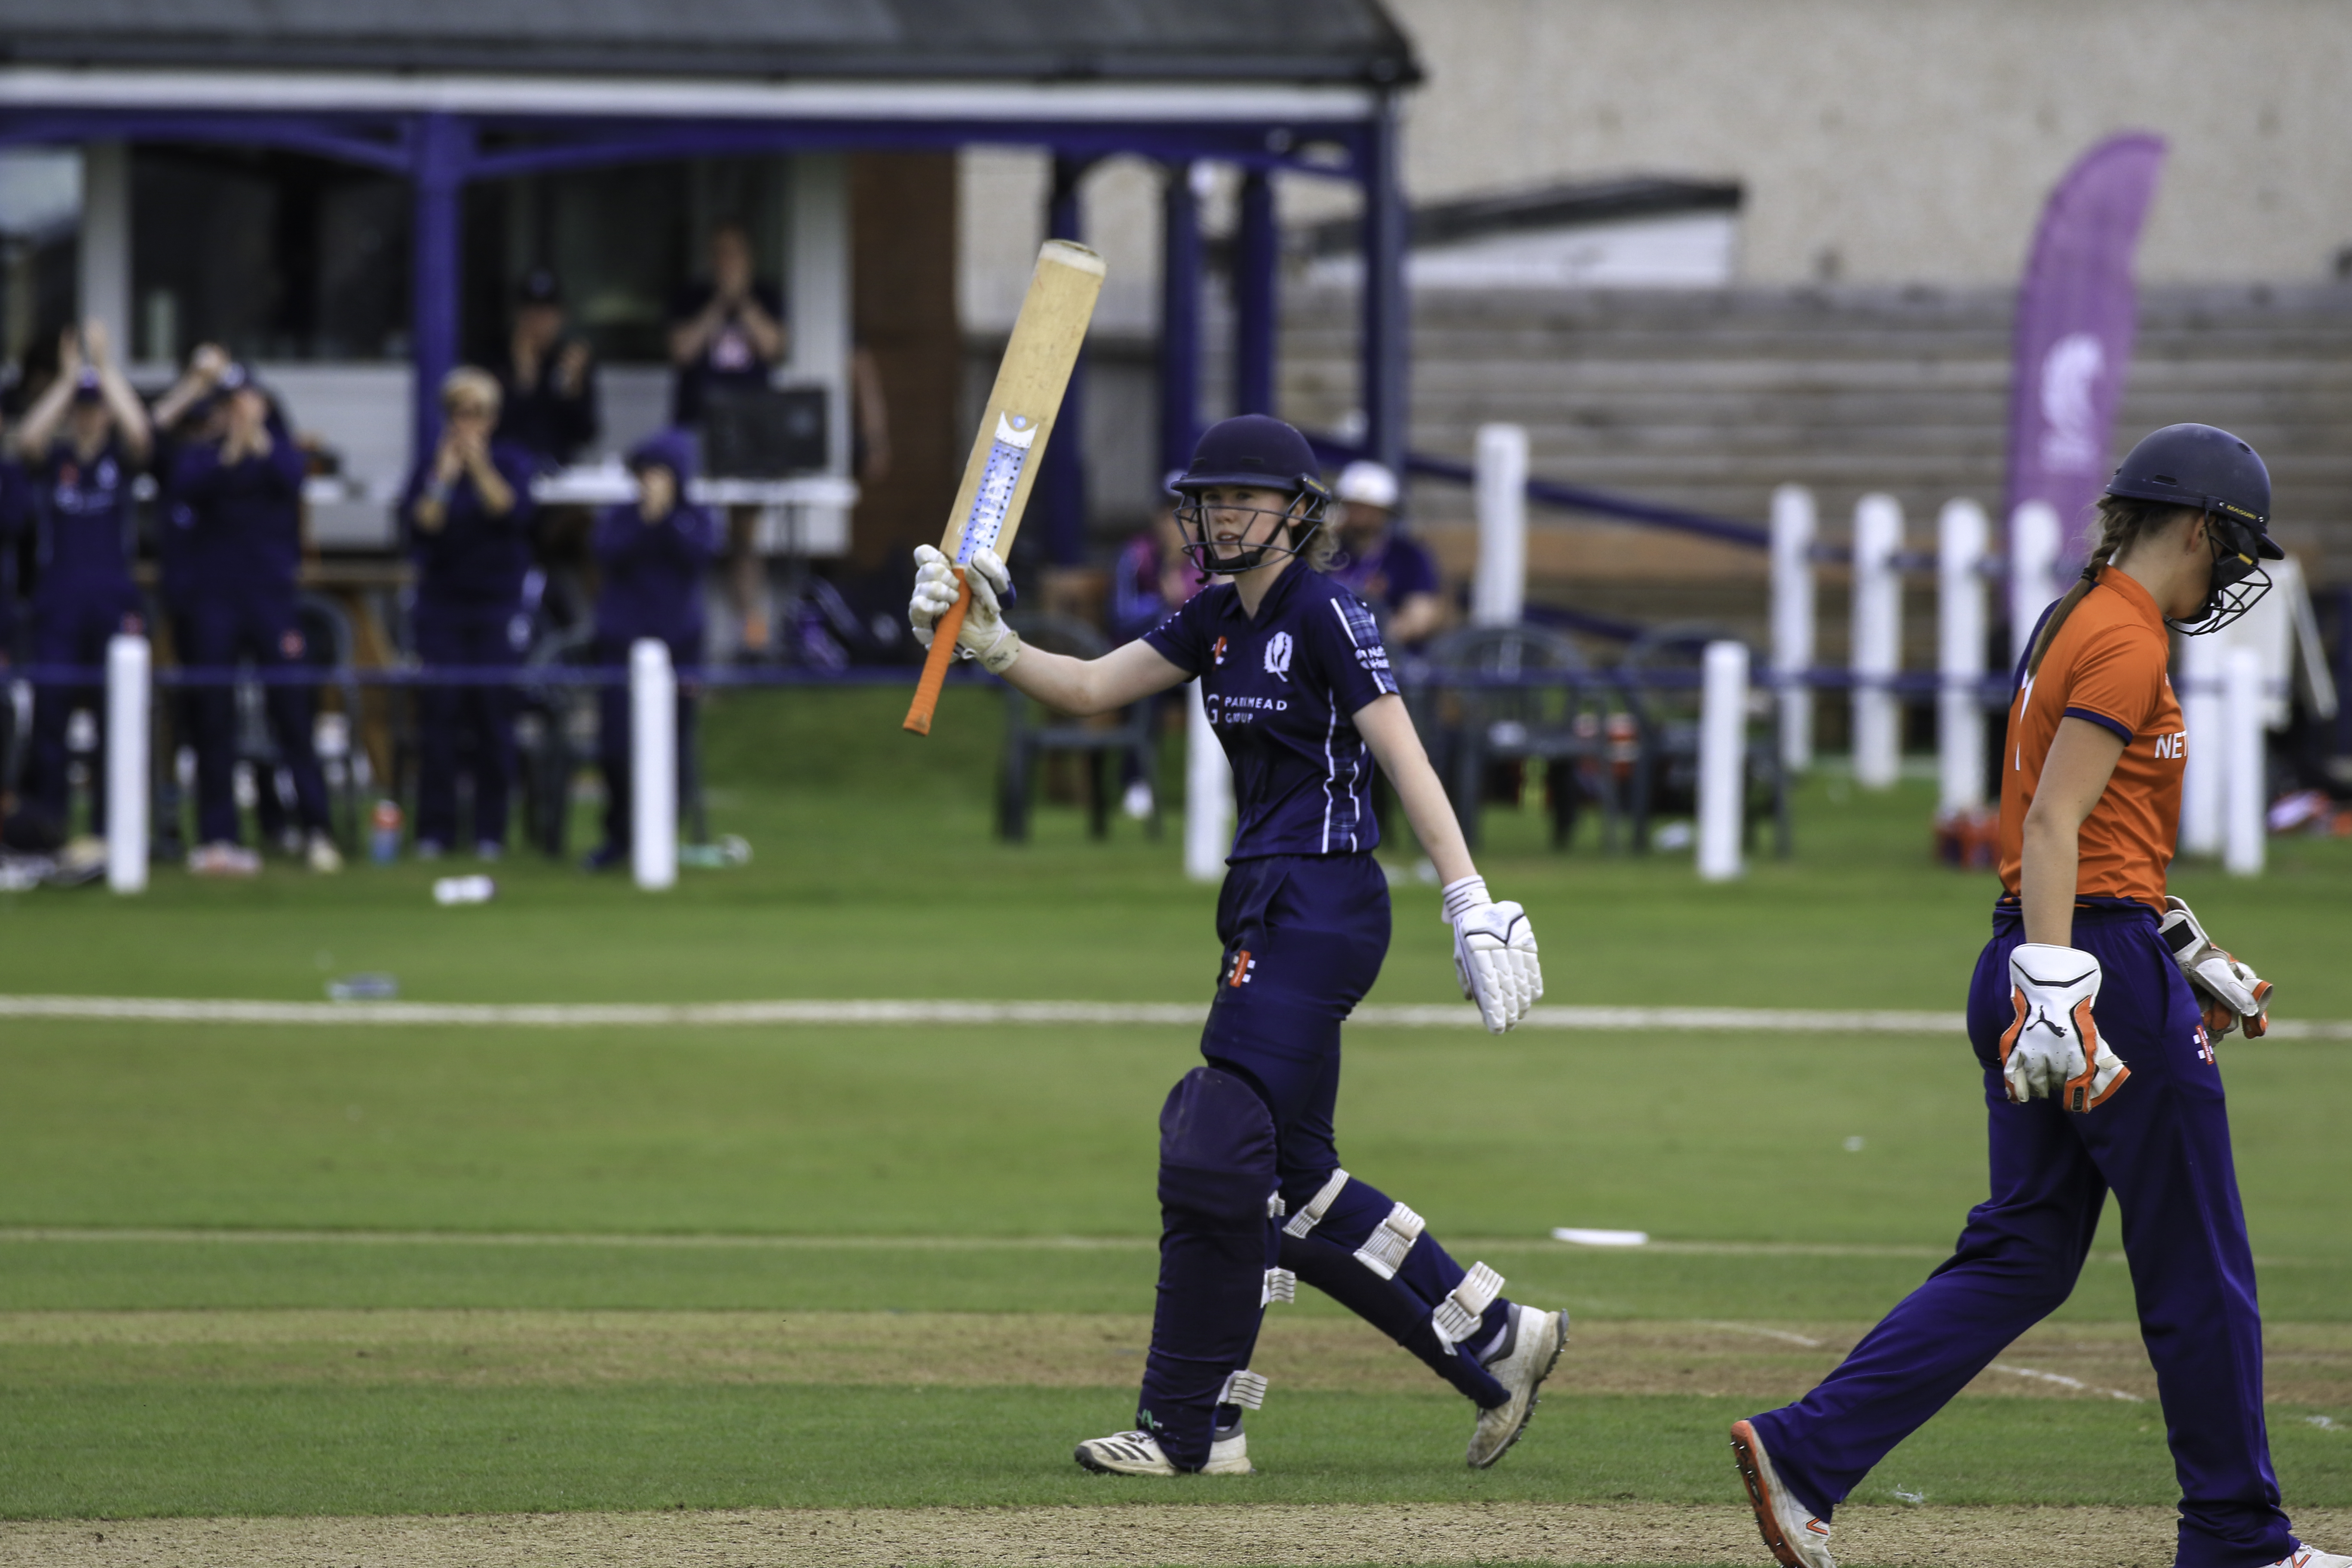 Sarah Bryce and Katie McGill selected for Women’s Global Development Squad